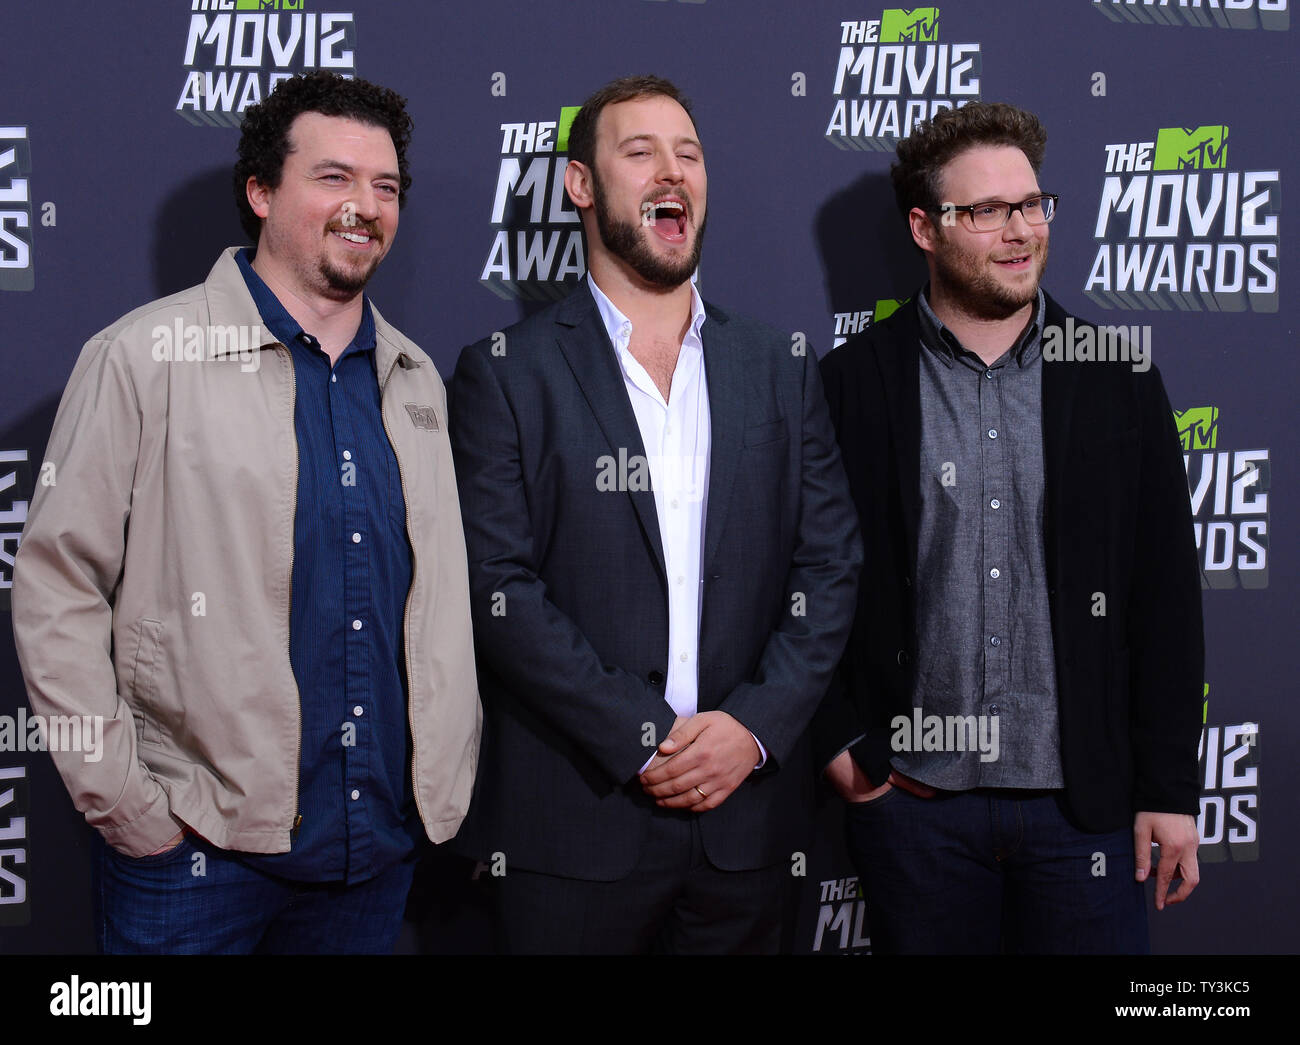 Actor Danny McBride, director Evan Goldberg and actor Seth Rogen arrive for The MTV Movie Awards at Sony Picture Studios in Culver City, California on April 14, 2013.  UPI/Jim Ruymen Stock Photo